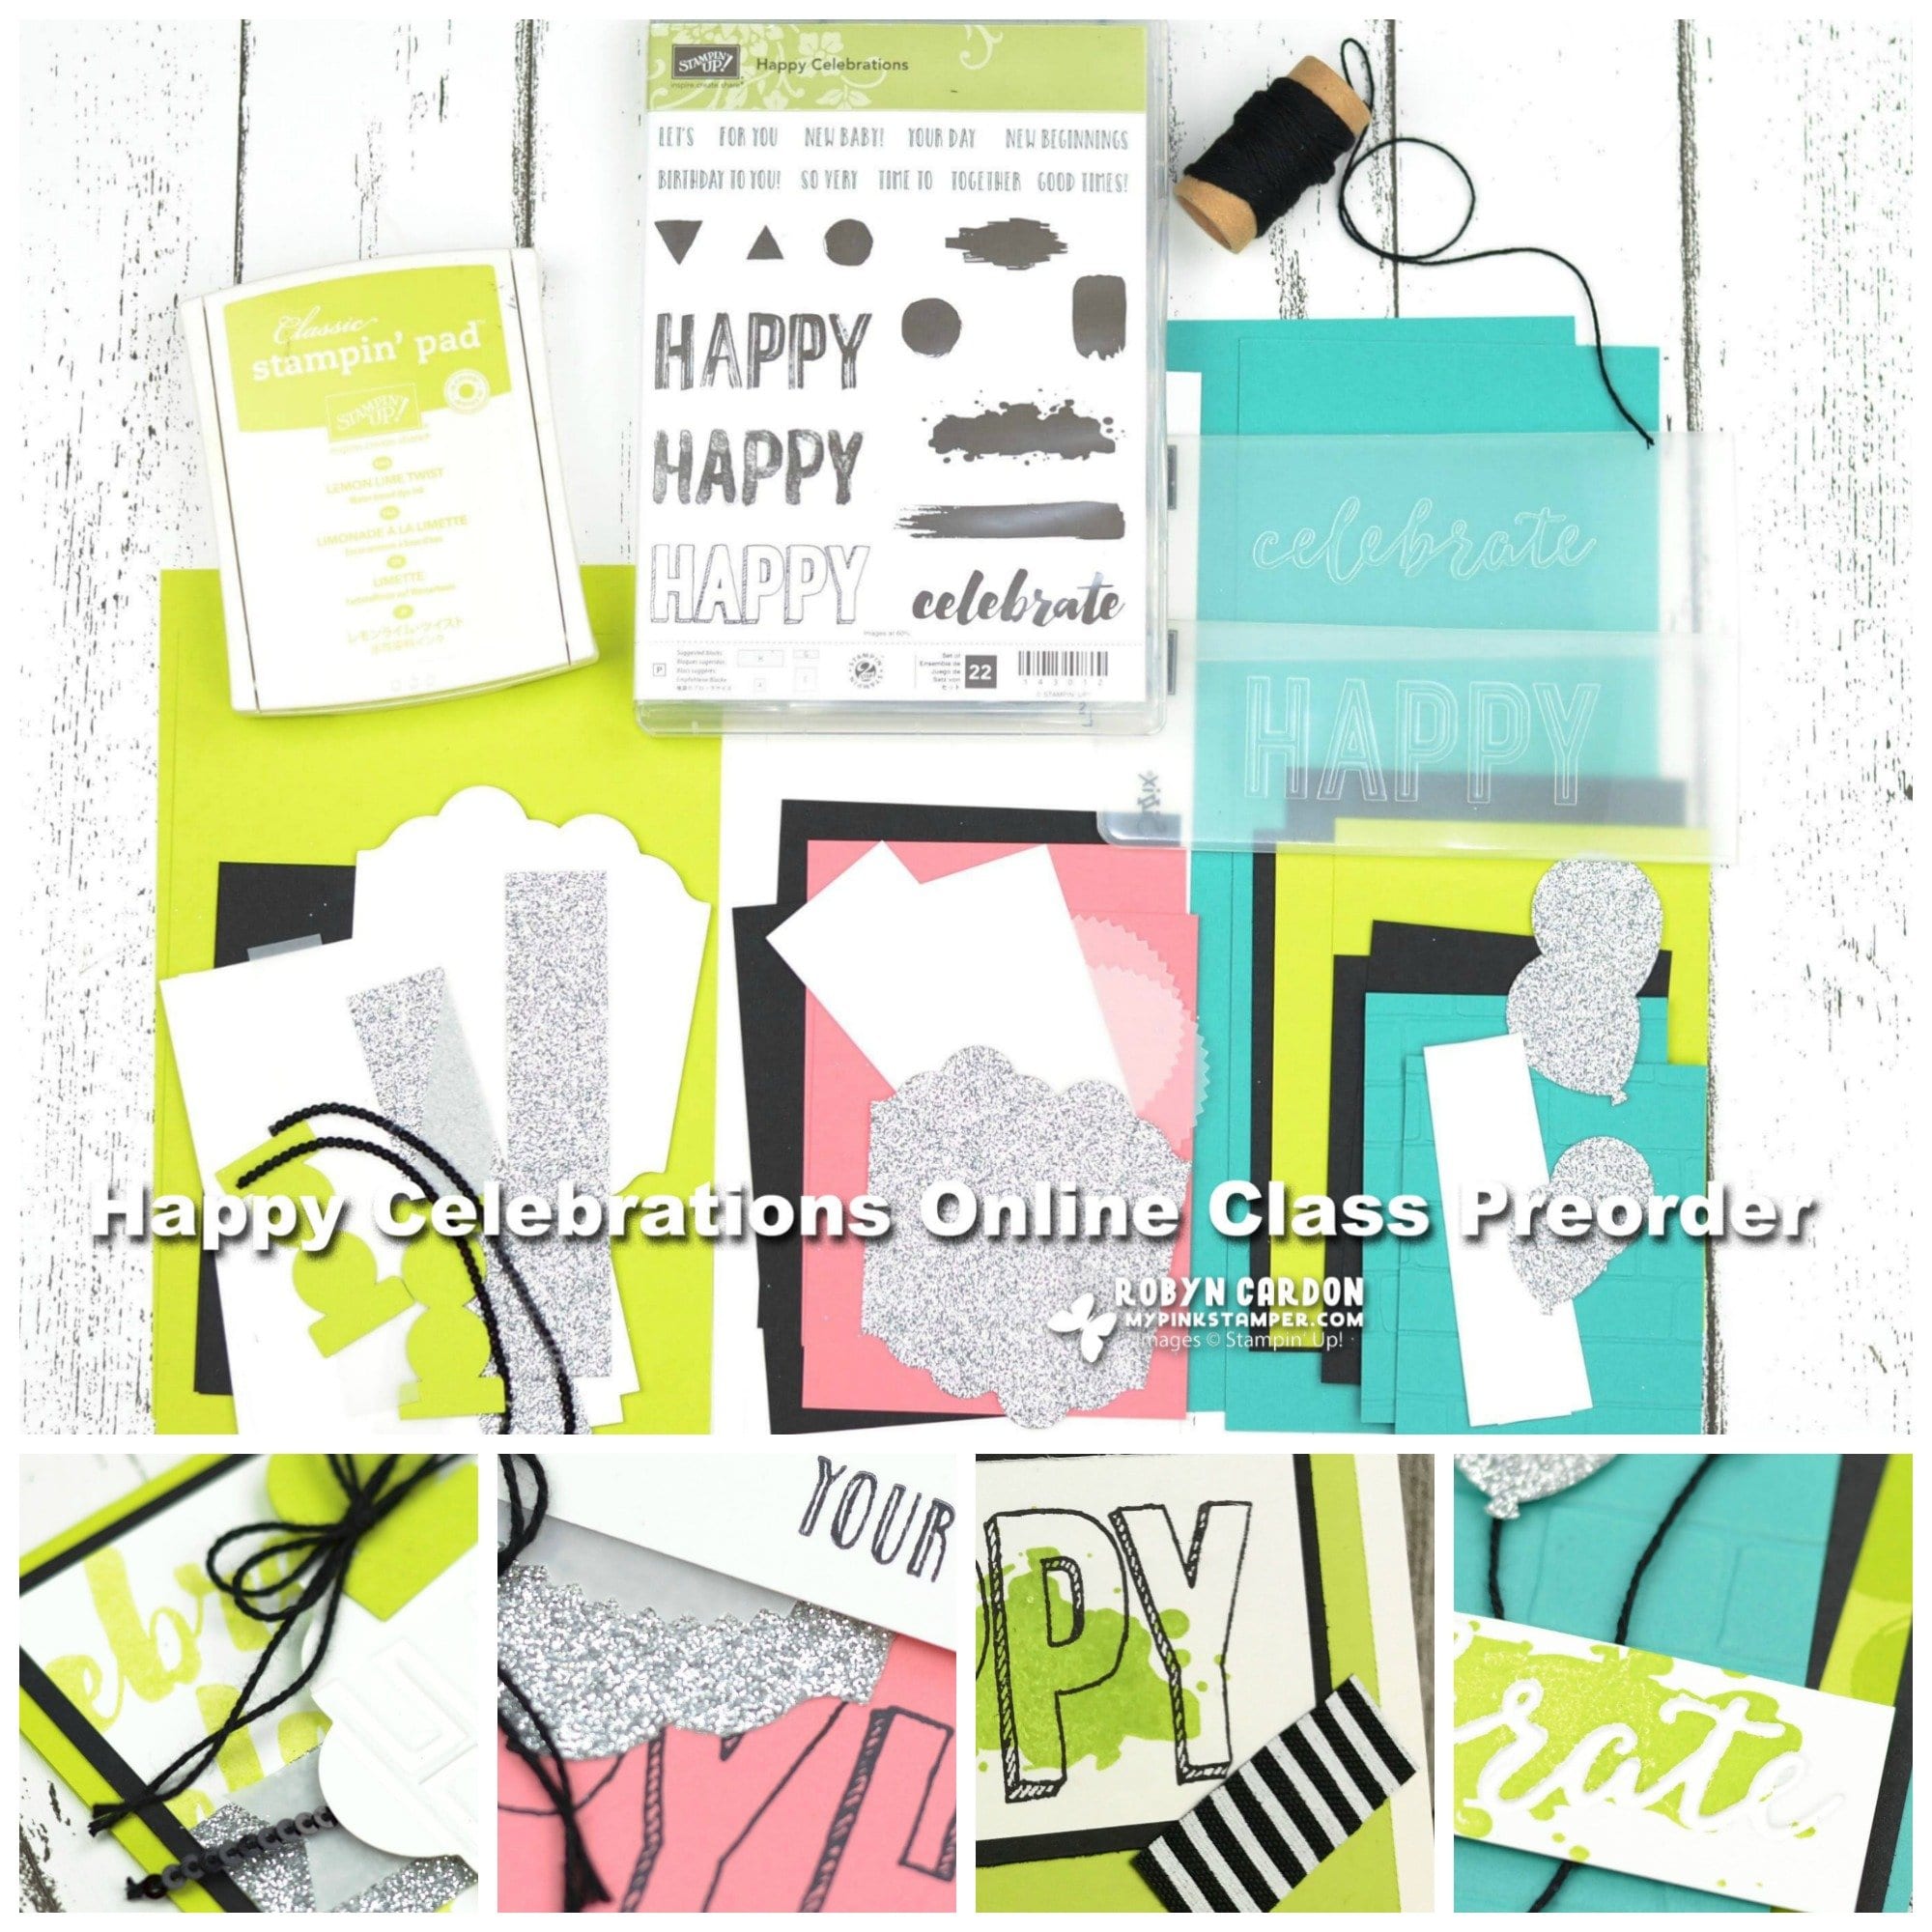 Day 6 – 12 Days of Christmas & Happy Celebrations Online Class Preorder!